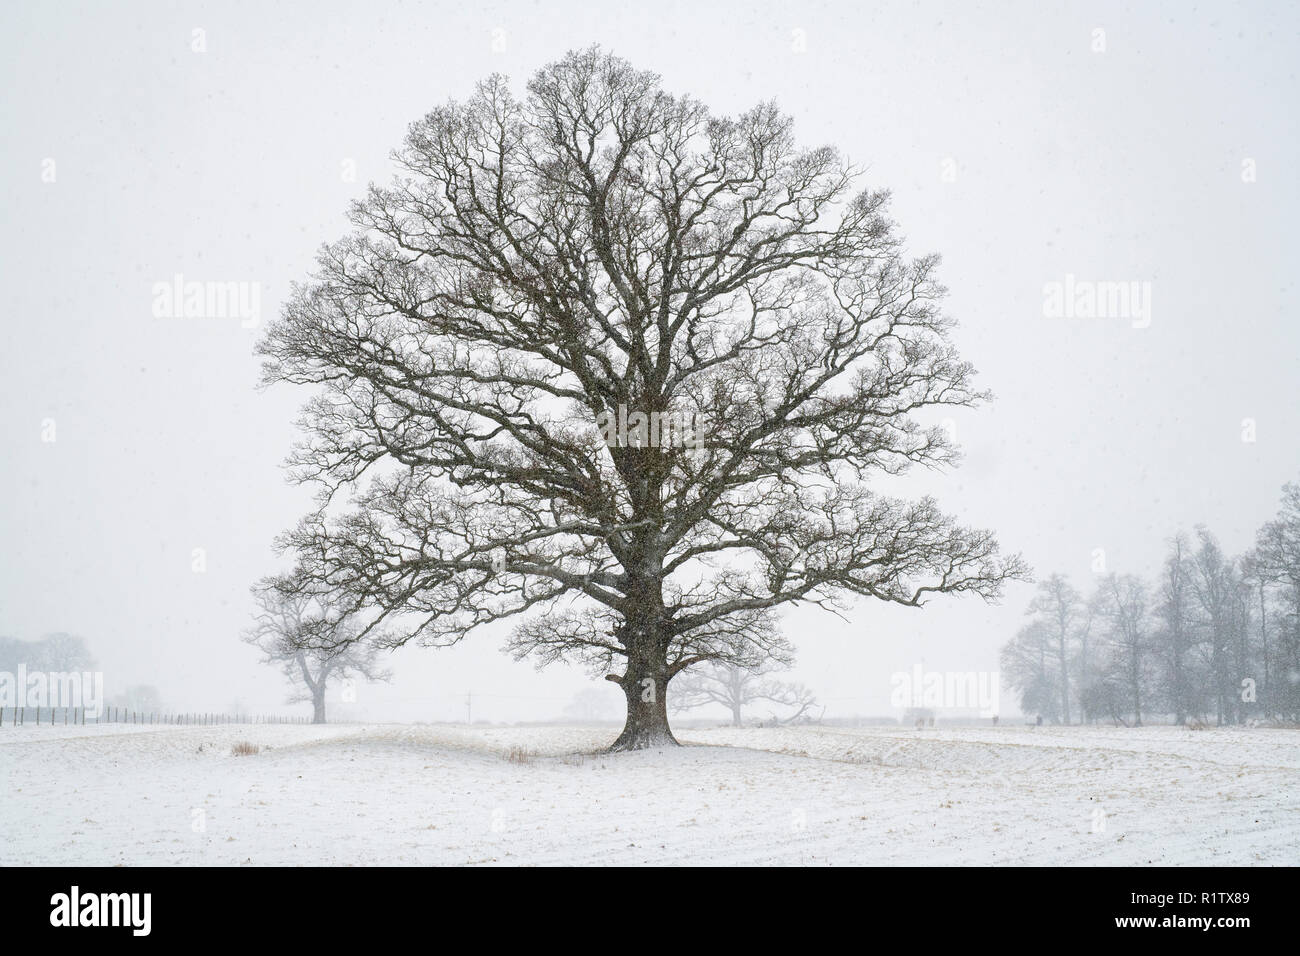 Quercus robur. Oak tree in the winter snow in the english countryside. Kings Sutton, Northamptonshire. UK. A scene taken in different seasons Stock Photo